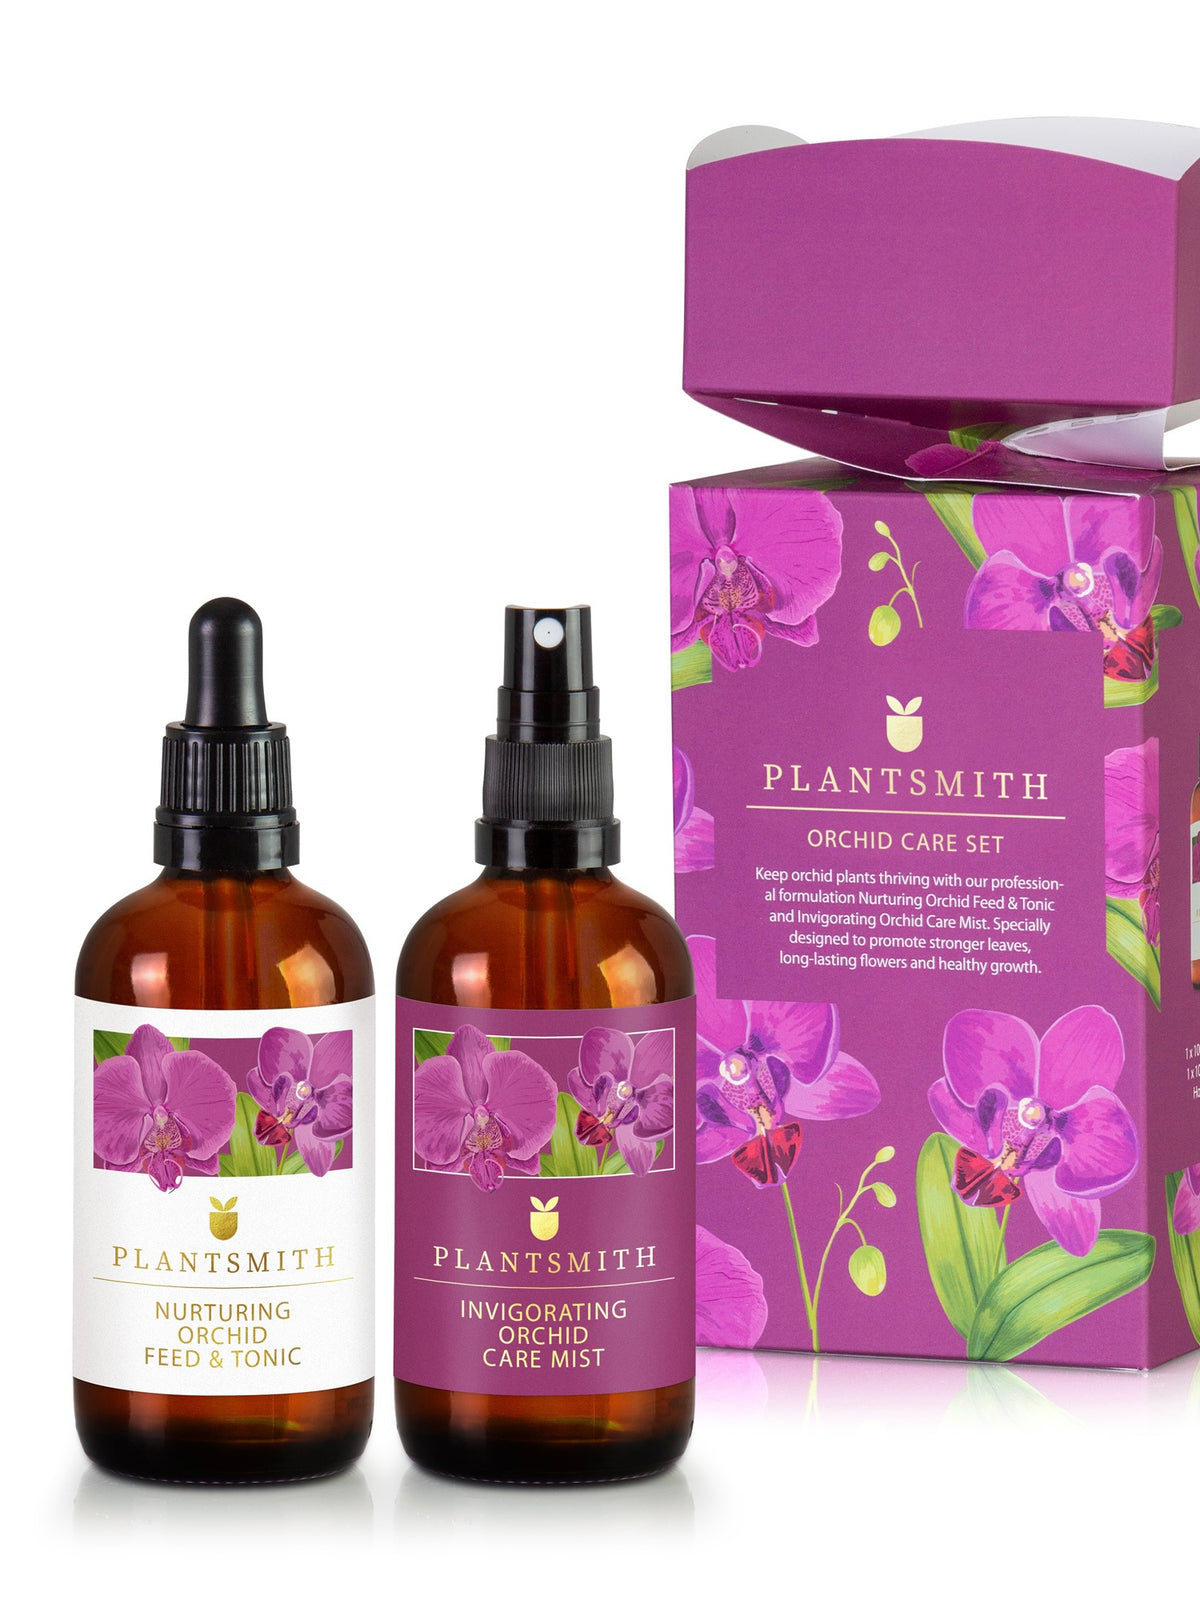 Plantsmith Orchid Care Cracker